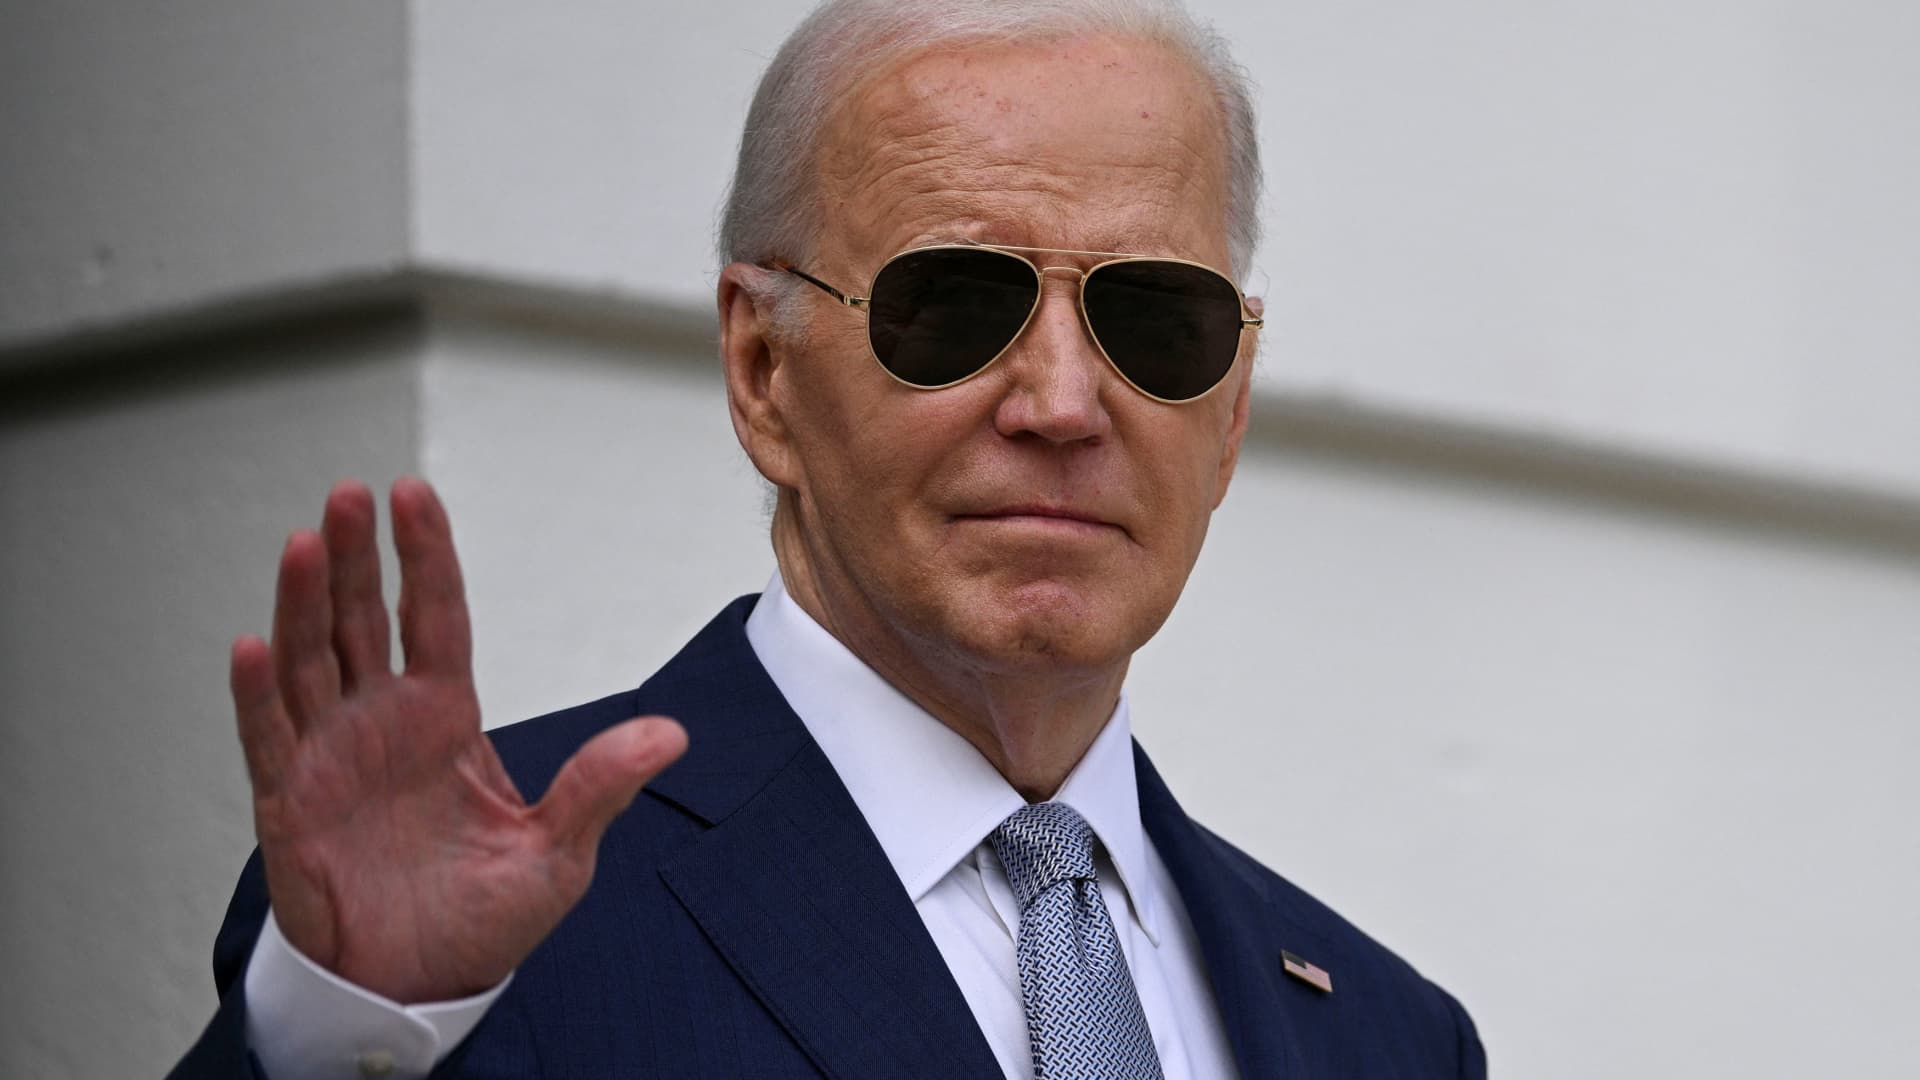 The Biden White House is trying to woo CEOs while bashing corporate greed